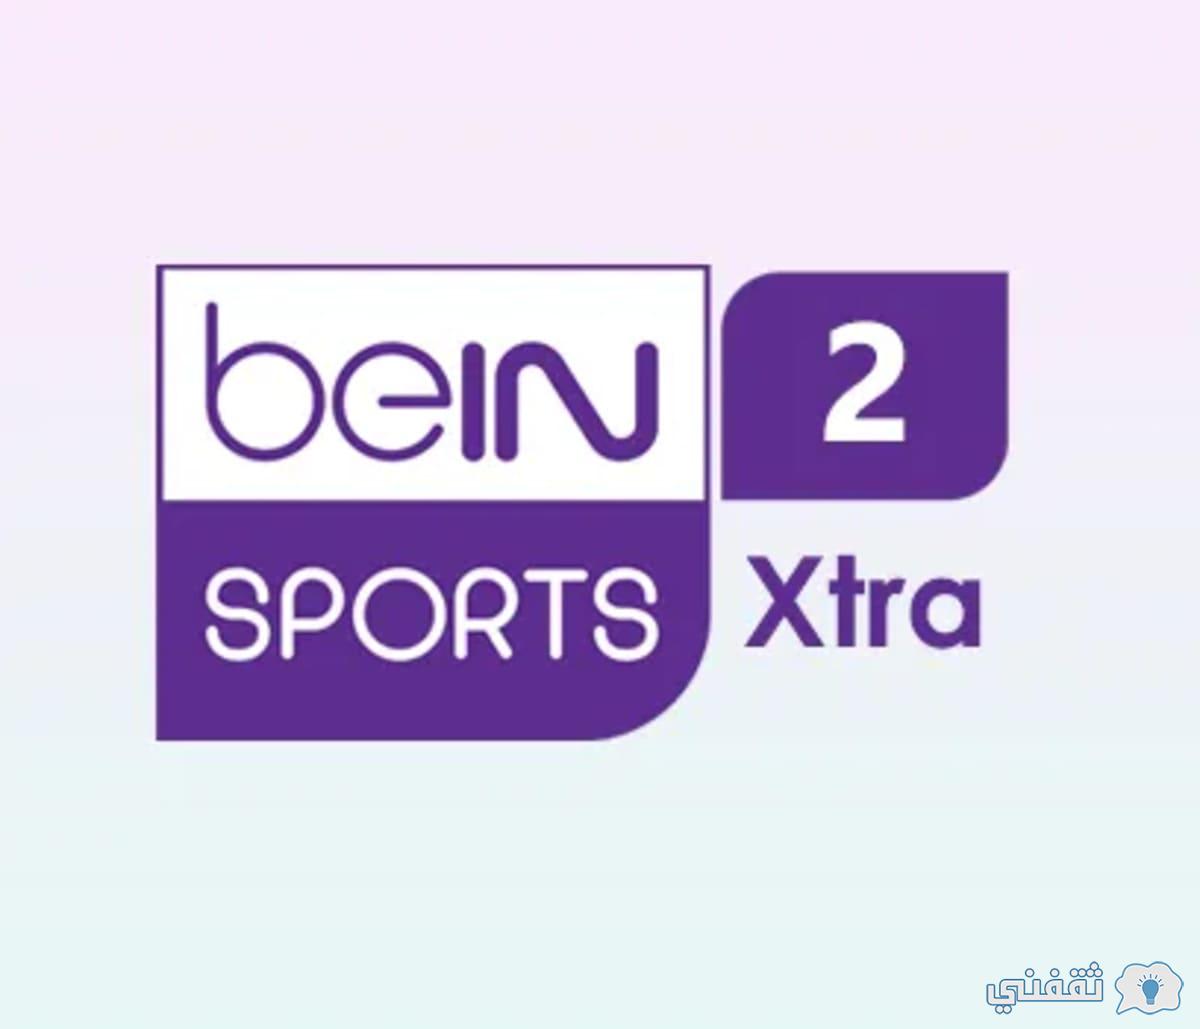 Bein sports live sport streaming. Логотип Телеканал Bein Sports. Bein Sports Max 2.